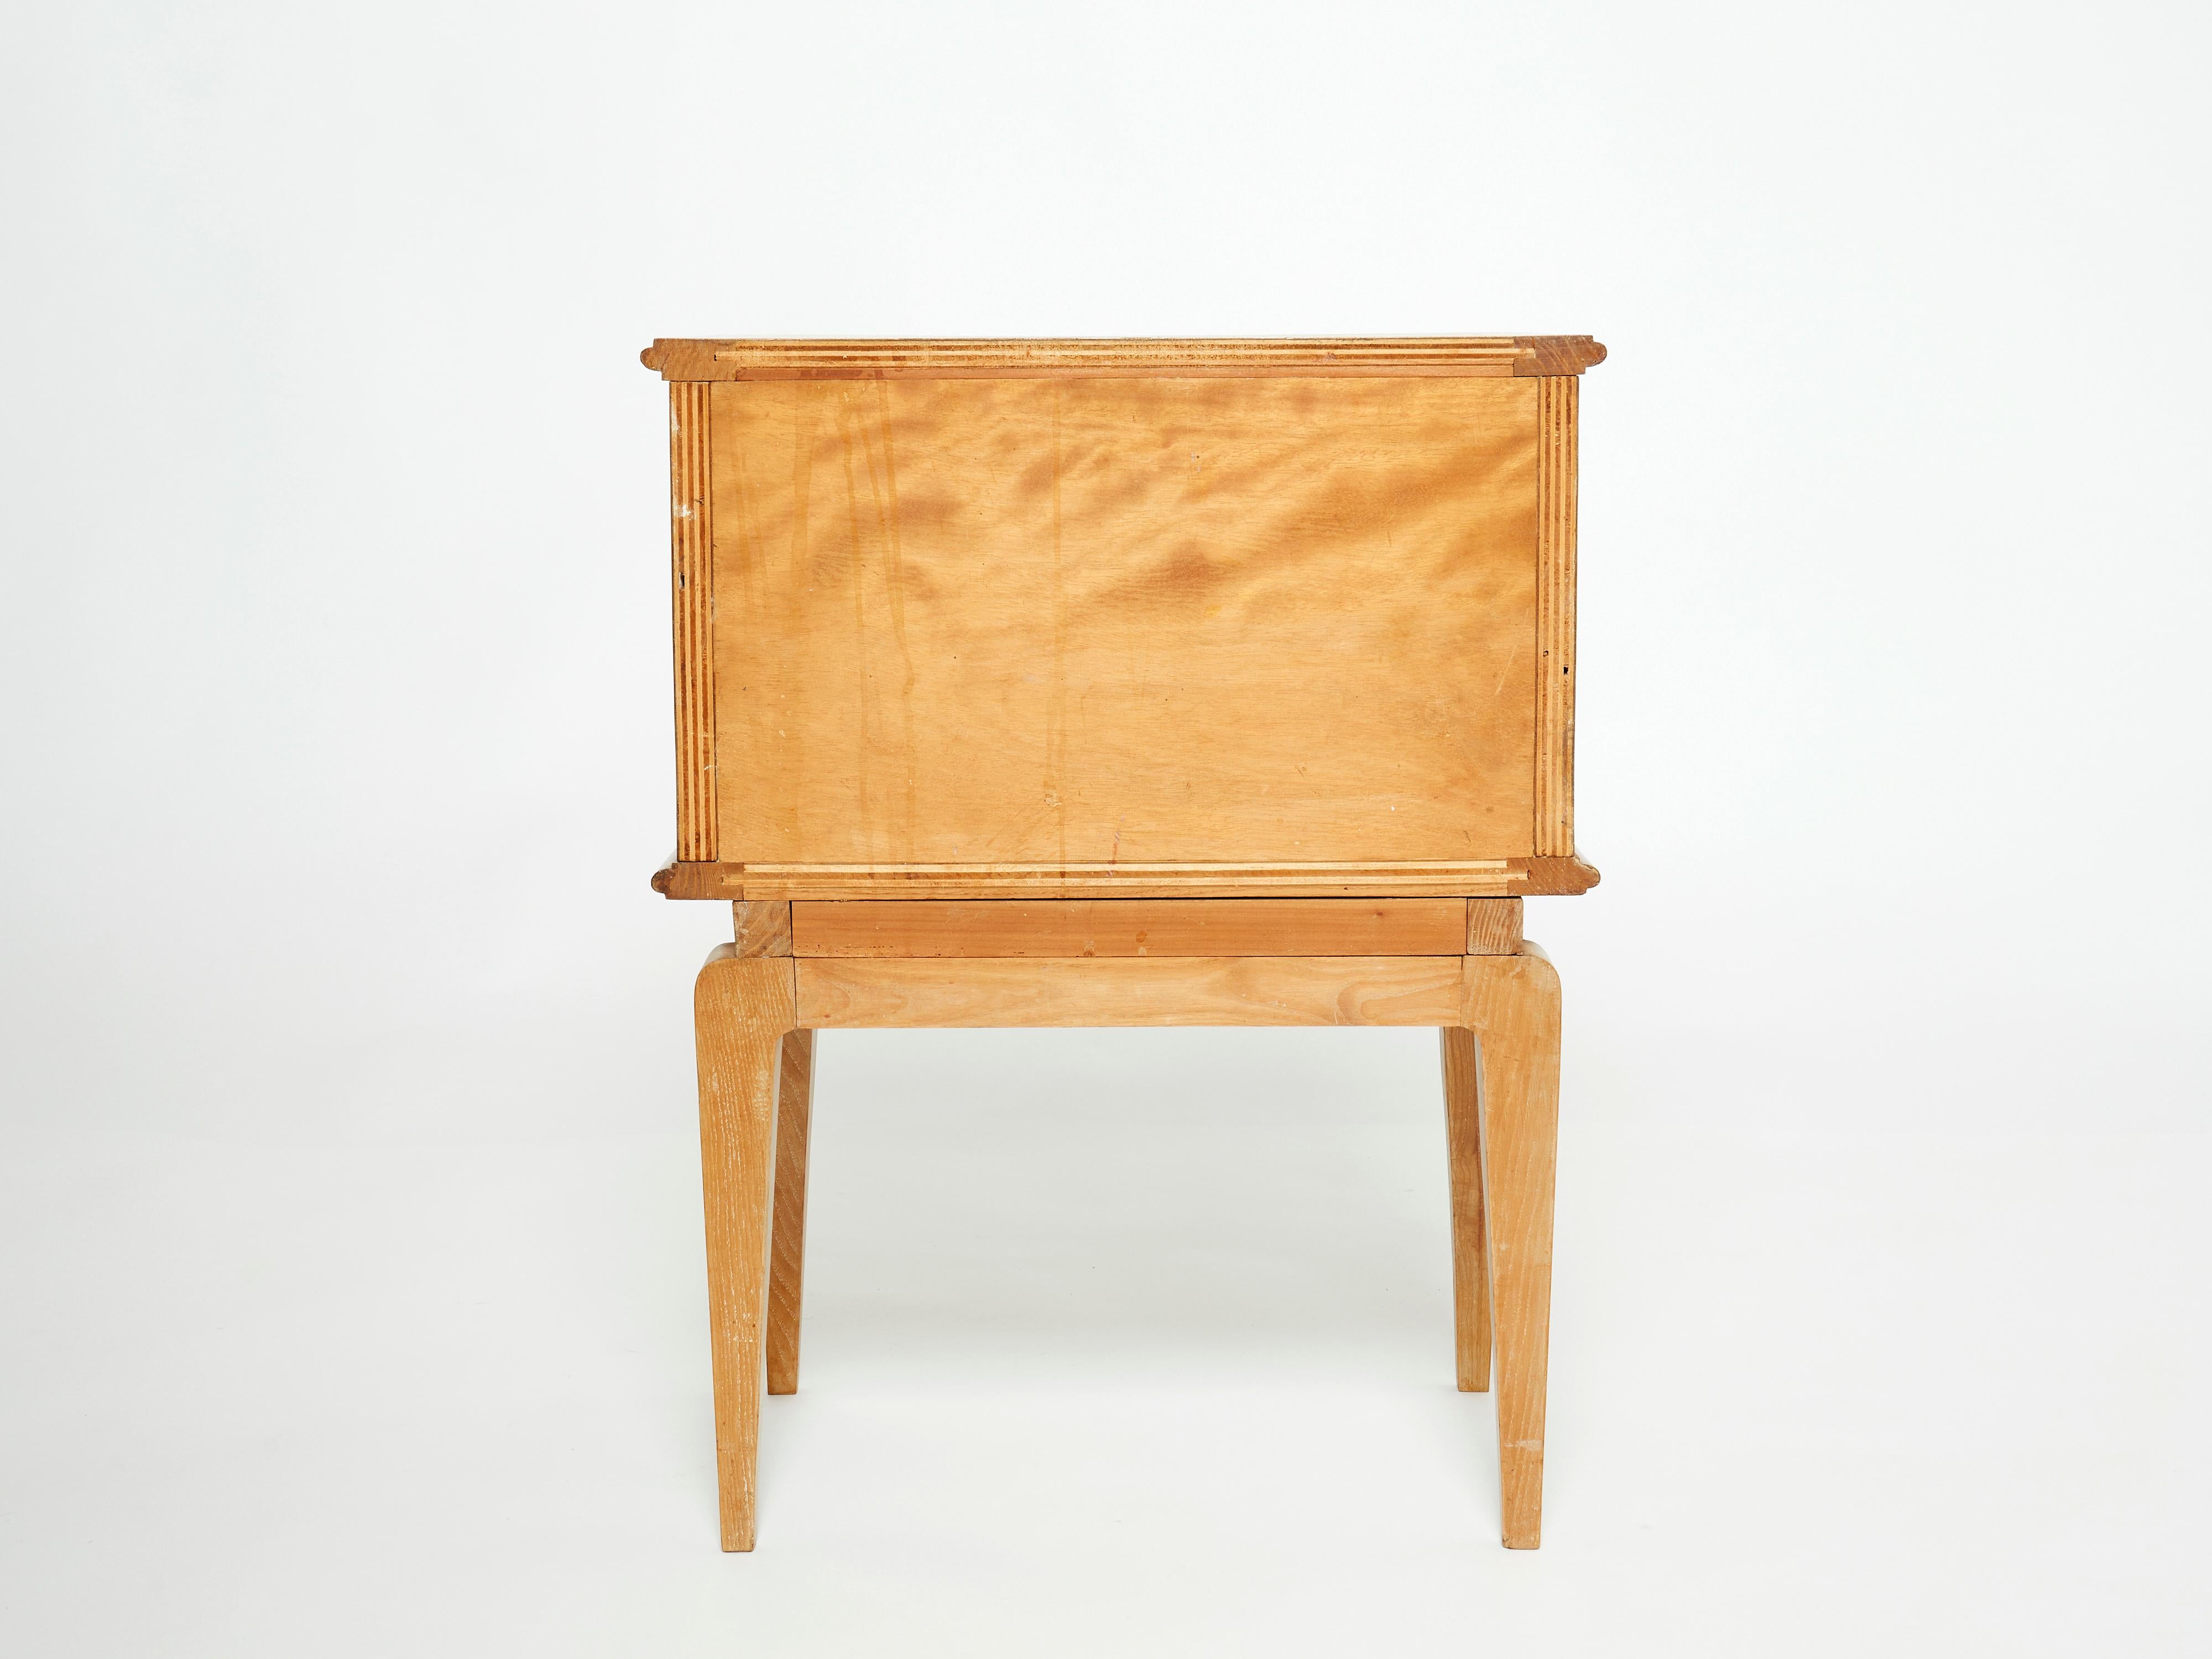 French Art Deco Carved Ash Wood Nightstand, 1940s For Sale 2